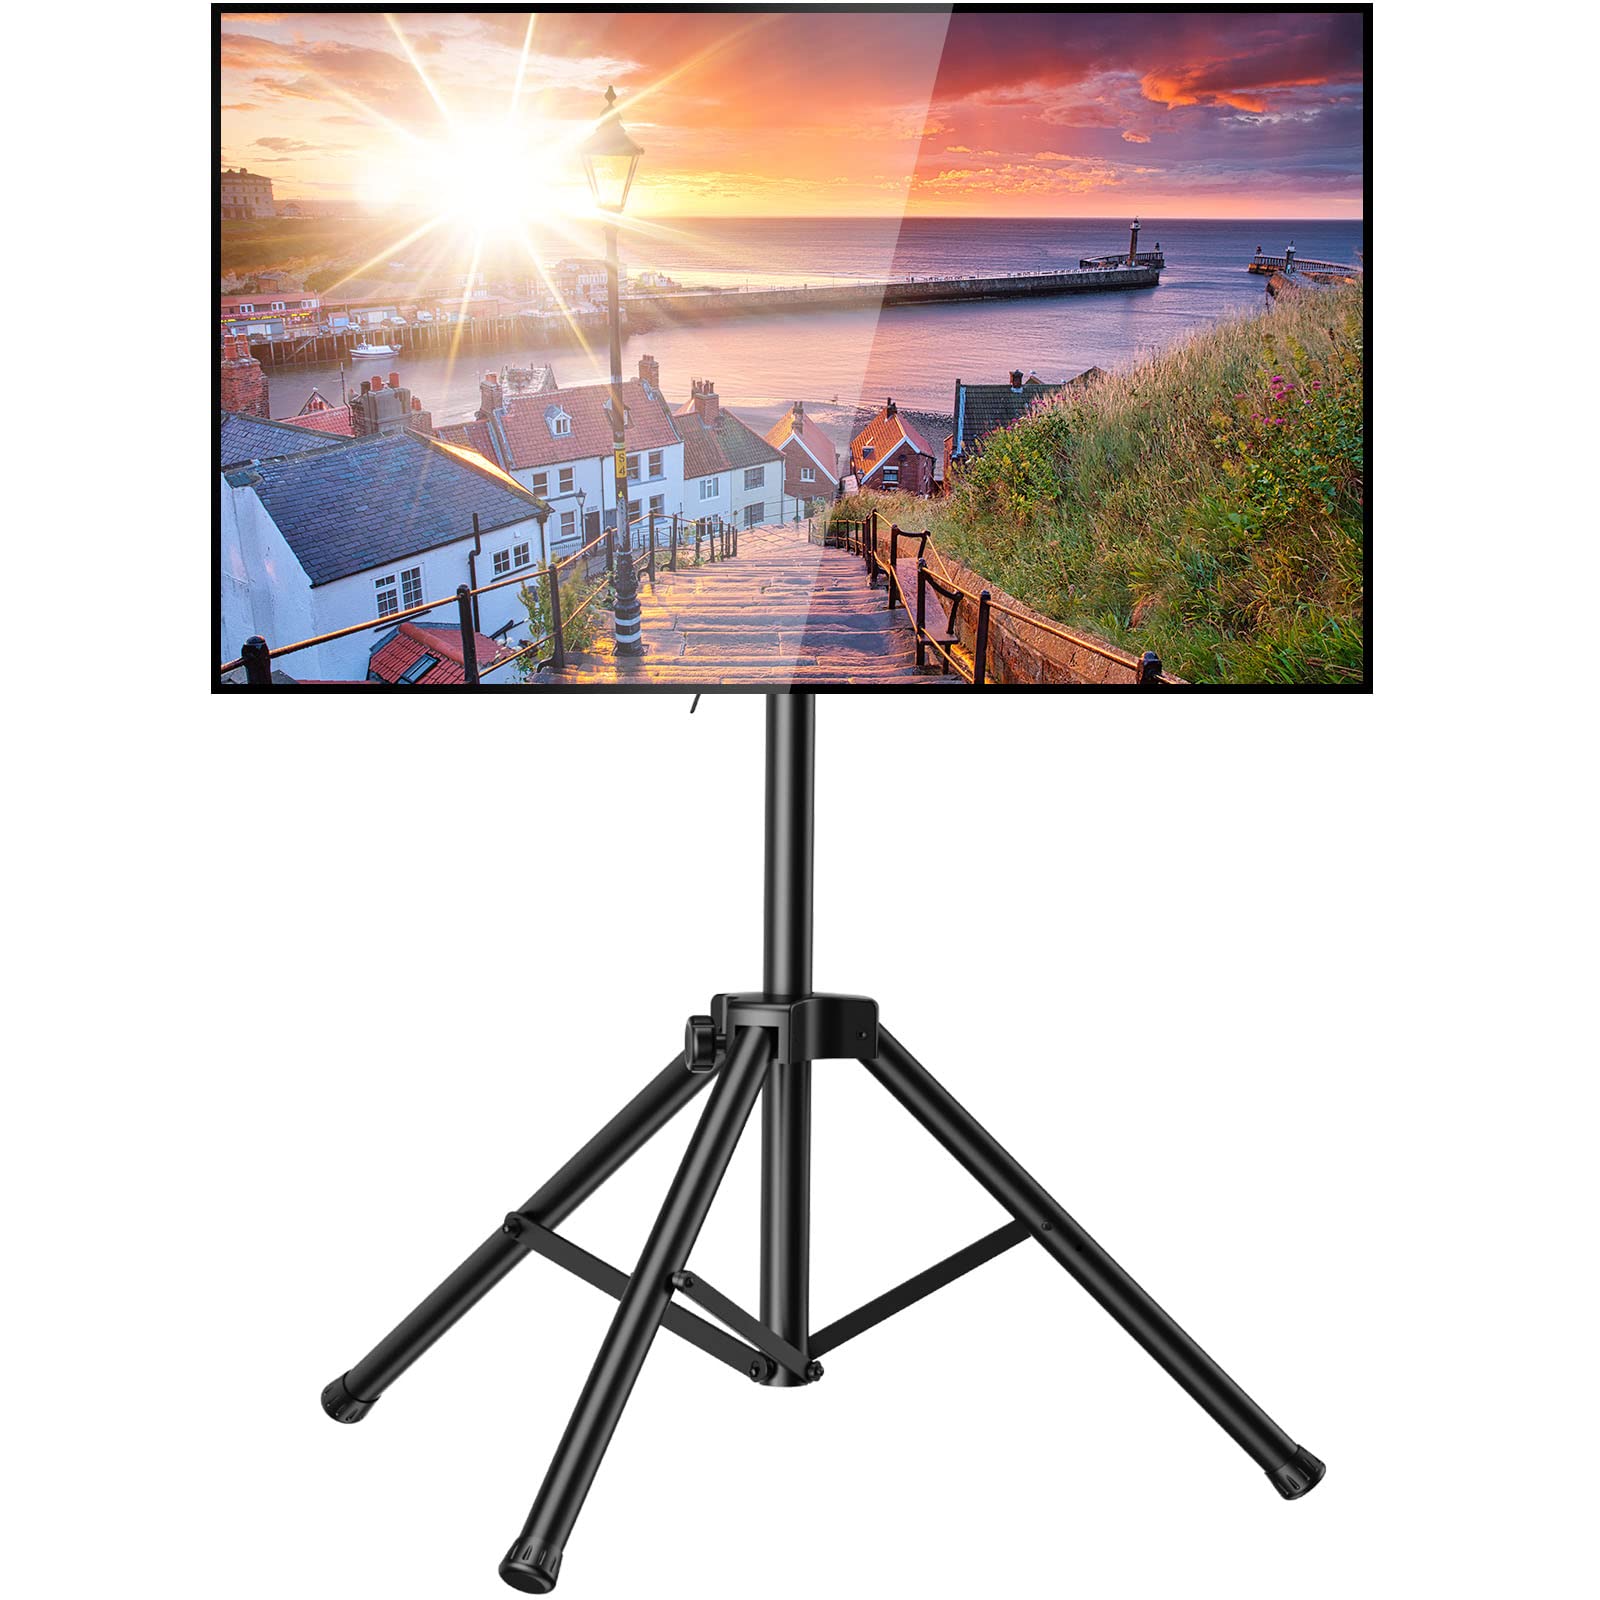 PERLESMITH Tripod TV Stand -Portable TV Stand for 37-80 Inch LED LCD OLED Flat Screen TVs-Height Adjustable Display Floor TV Sta